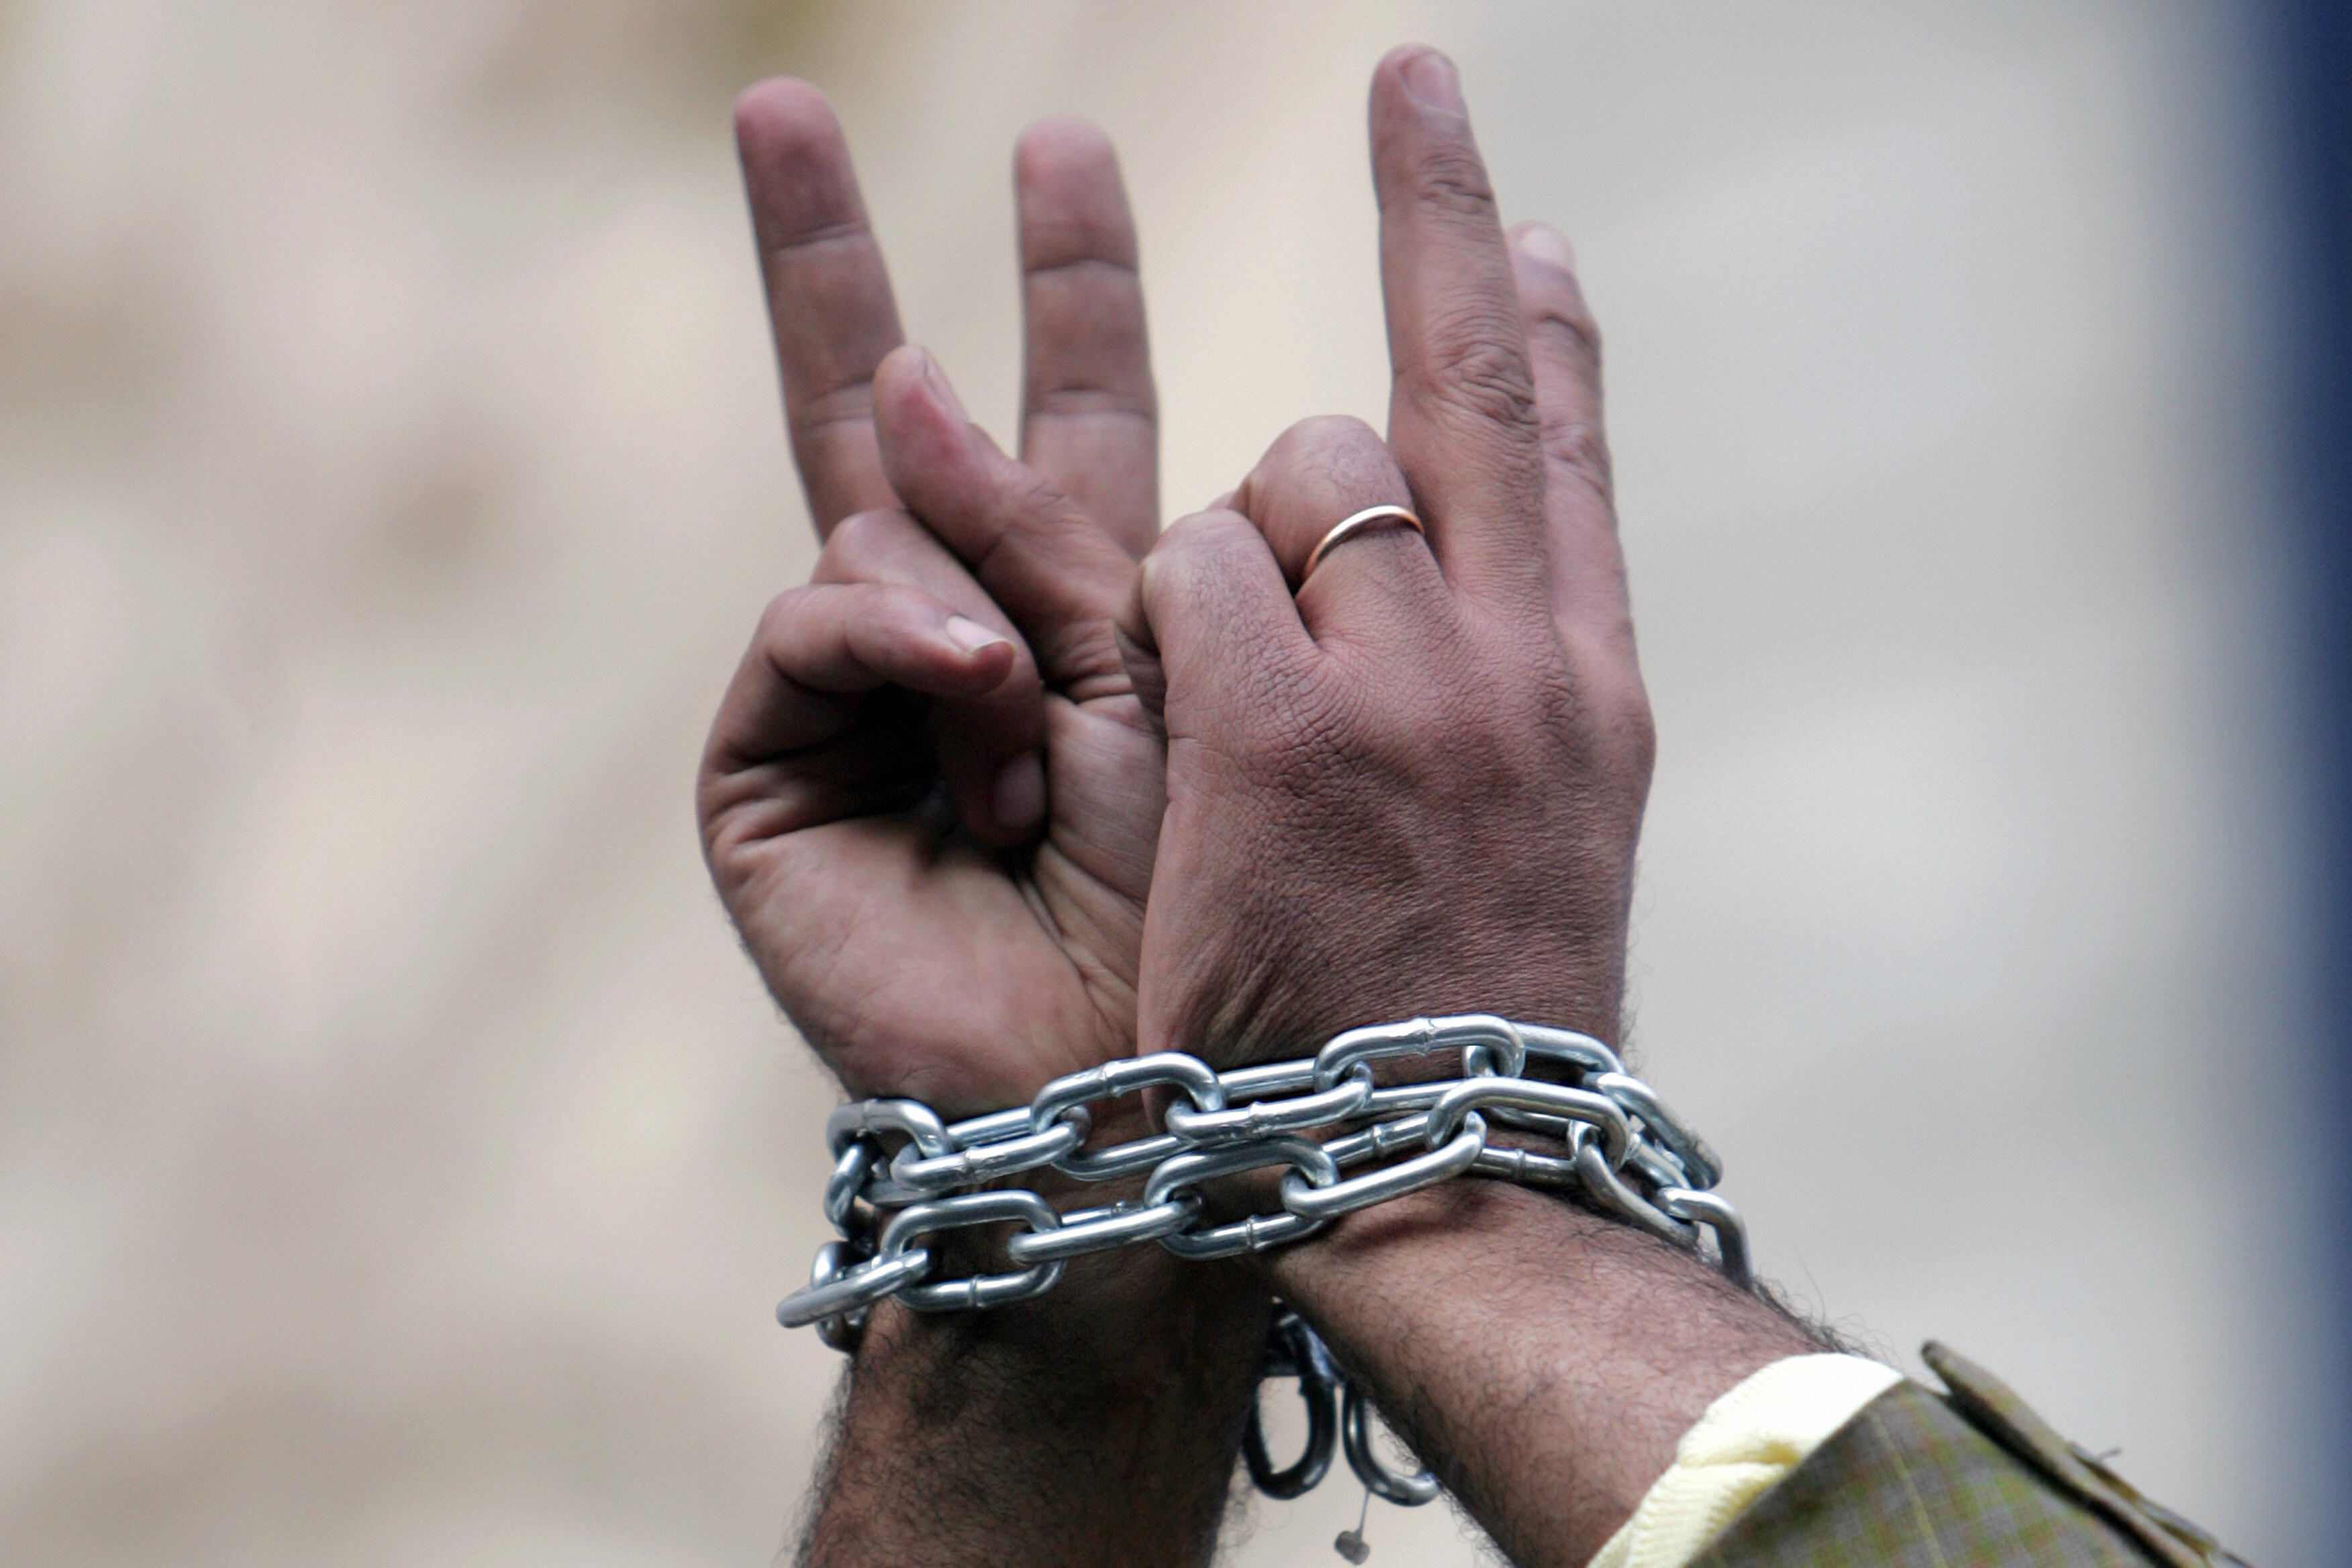 Egyptian human right activist with chained hands during a protest against torture in police stations. KHALED DESOUKI/AFP/Getty Images